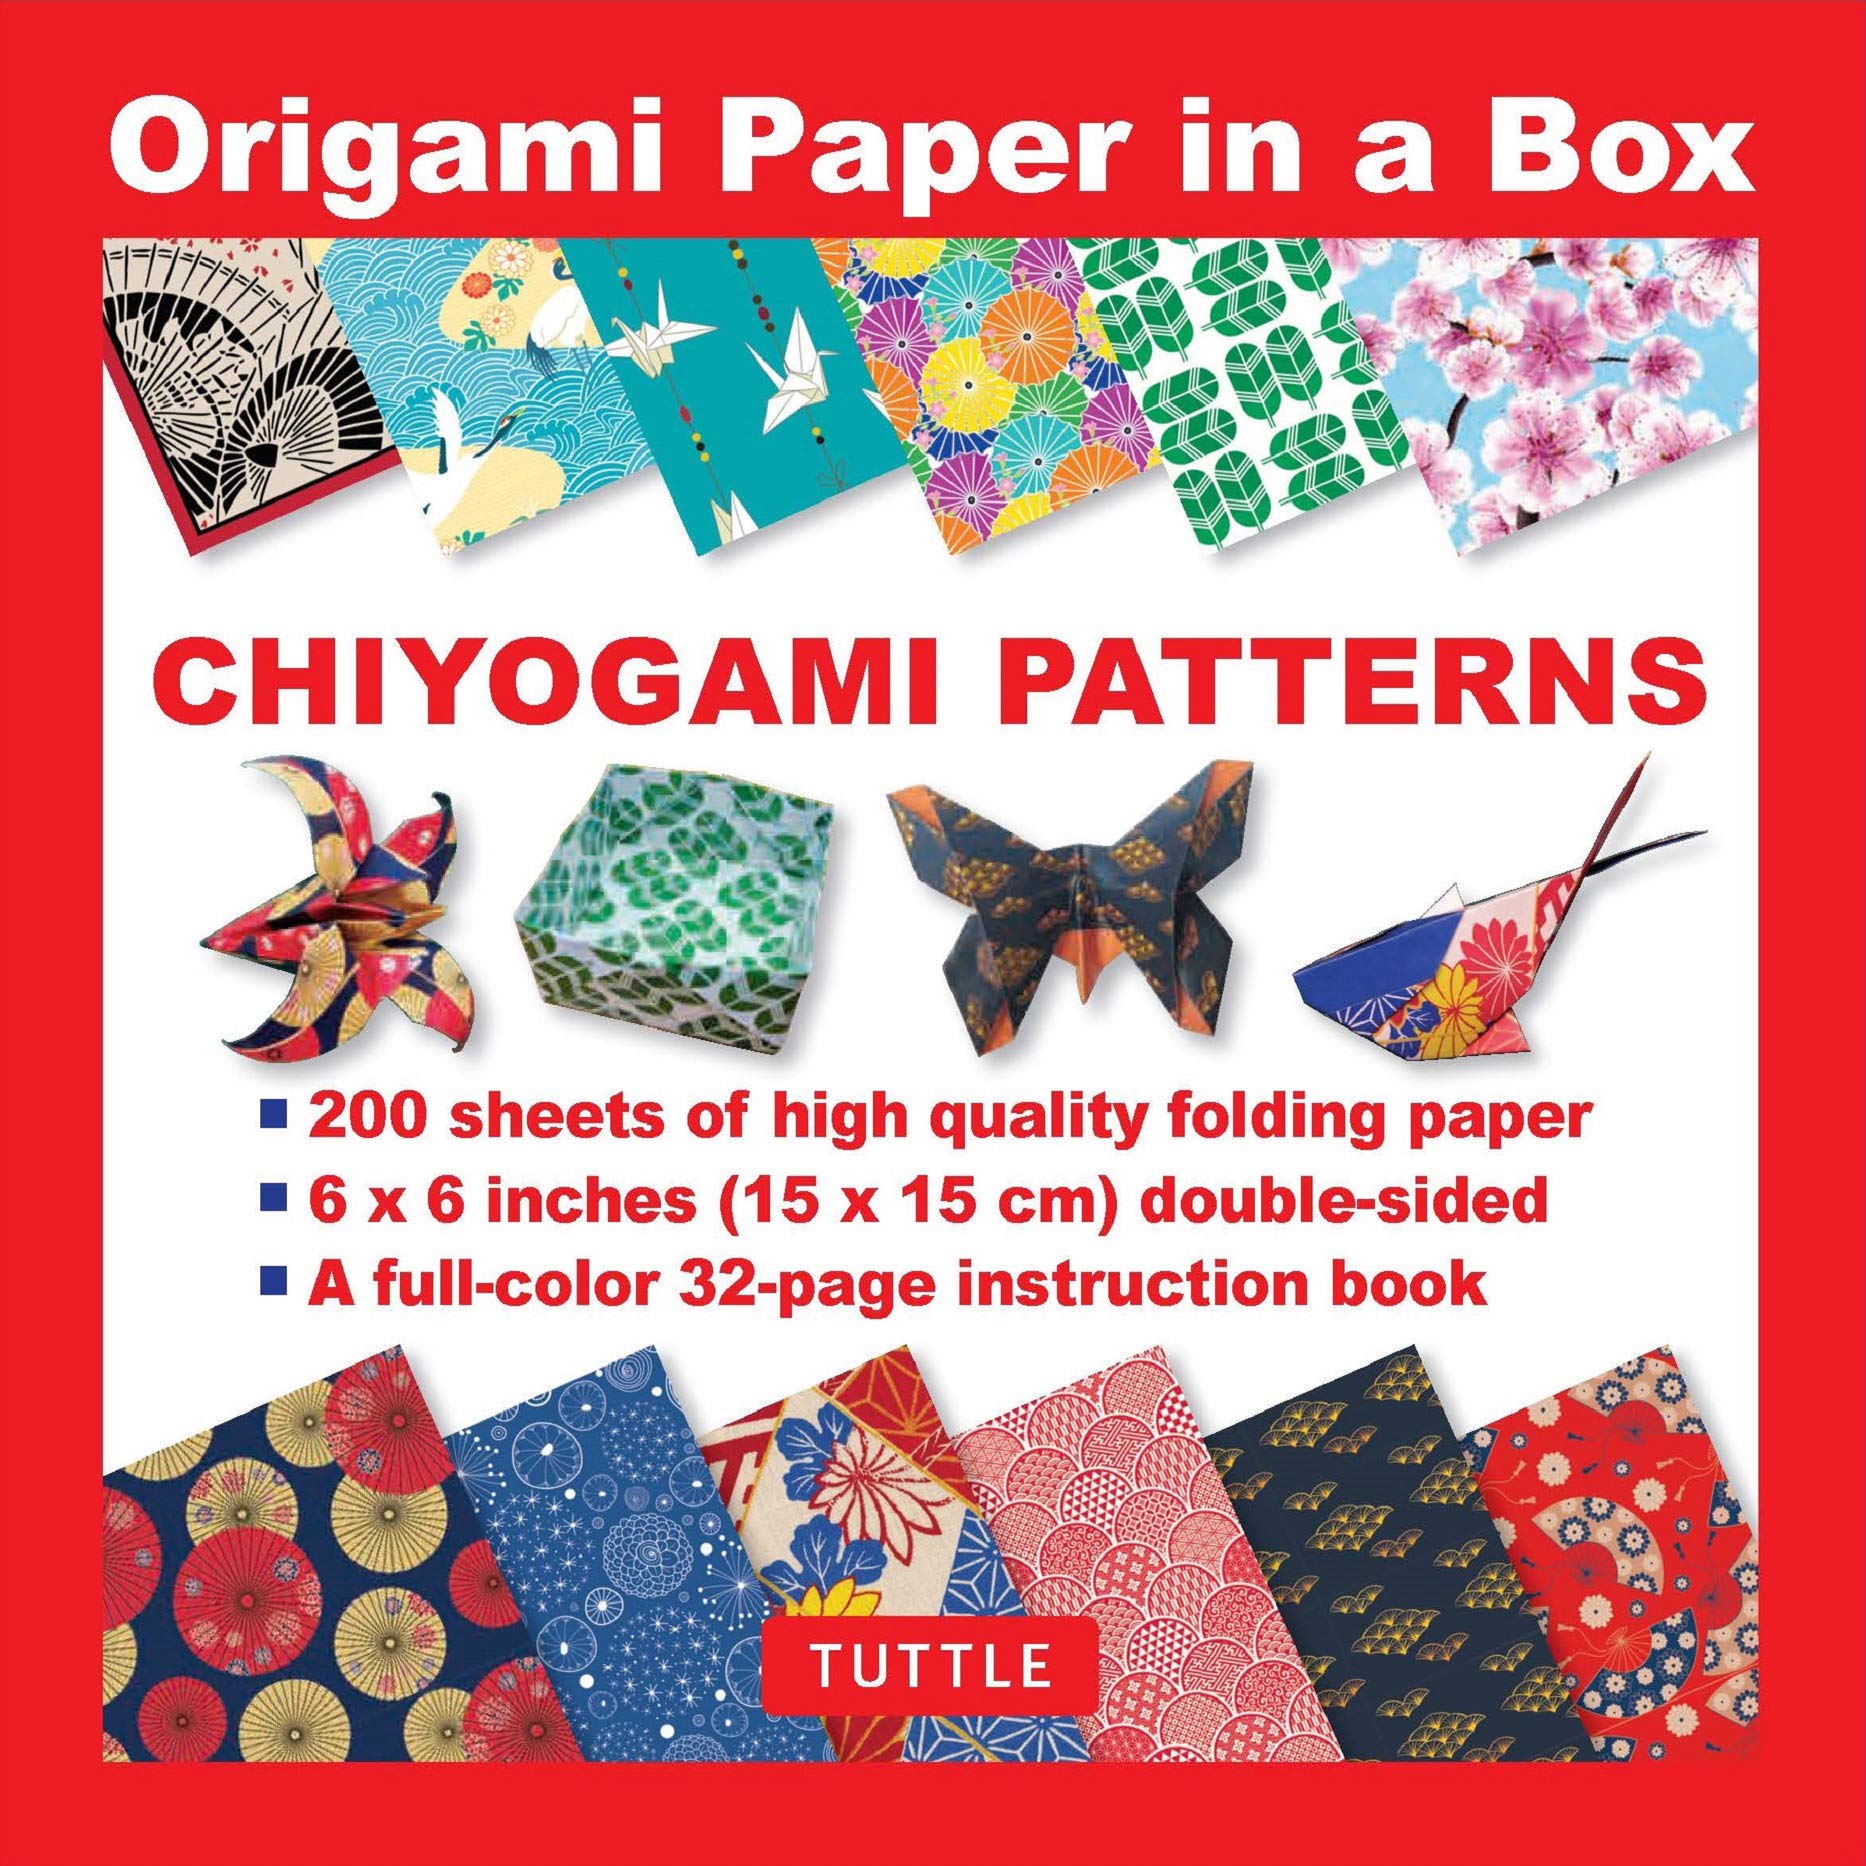 Origami Paper in a Box - Chiyogami Patterns |